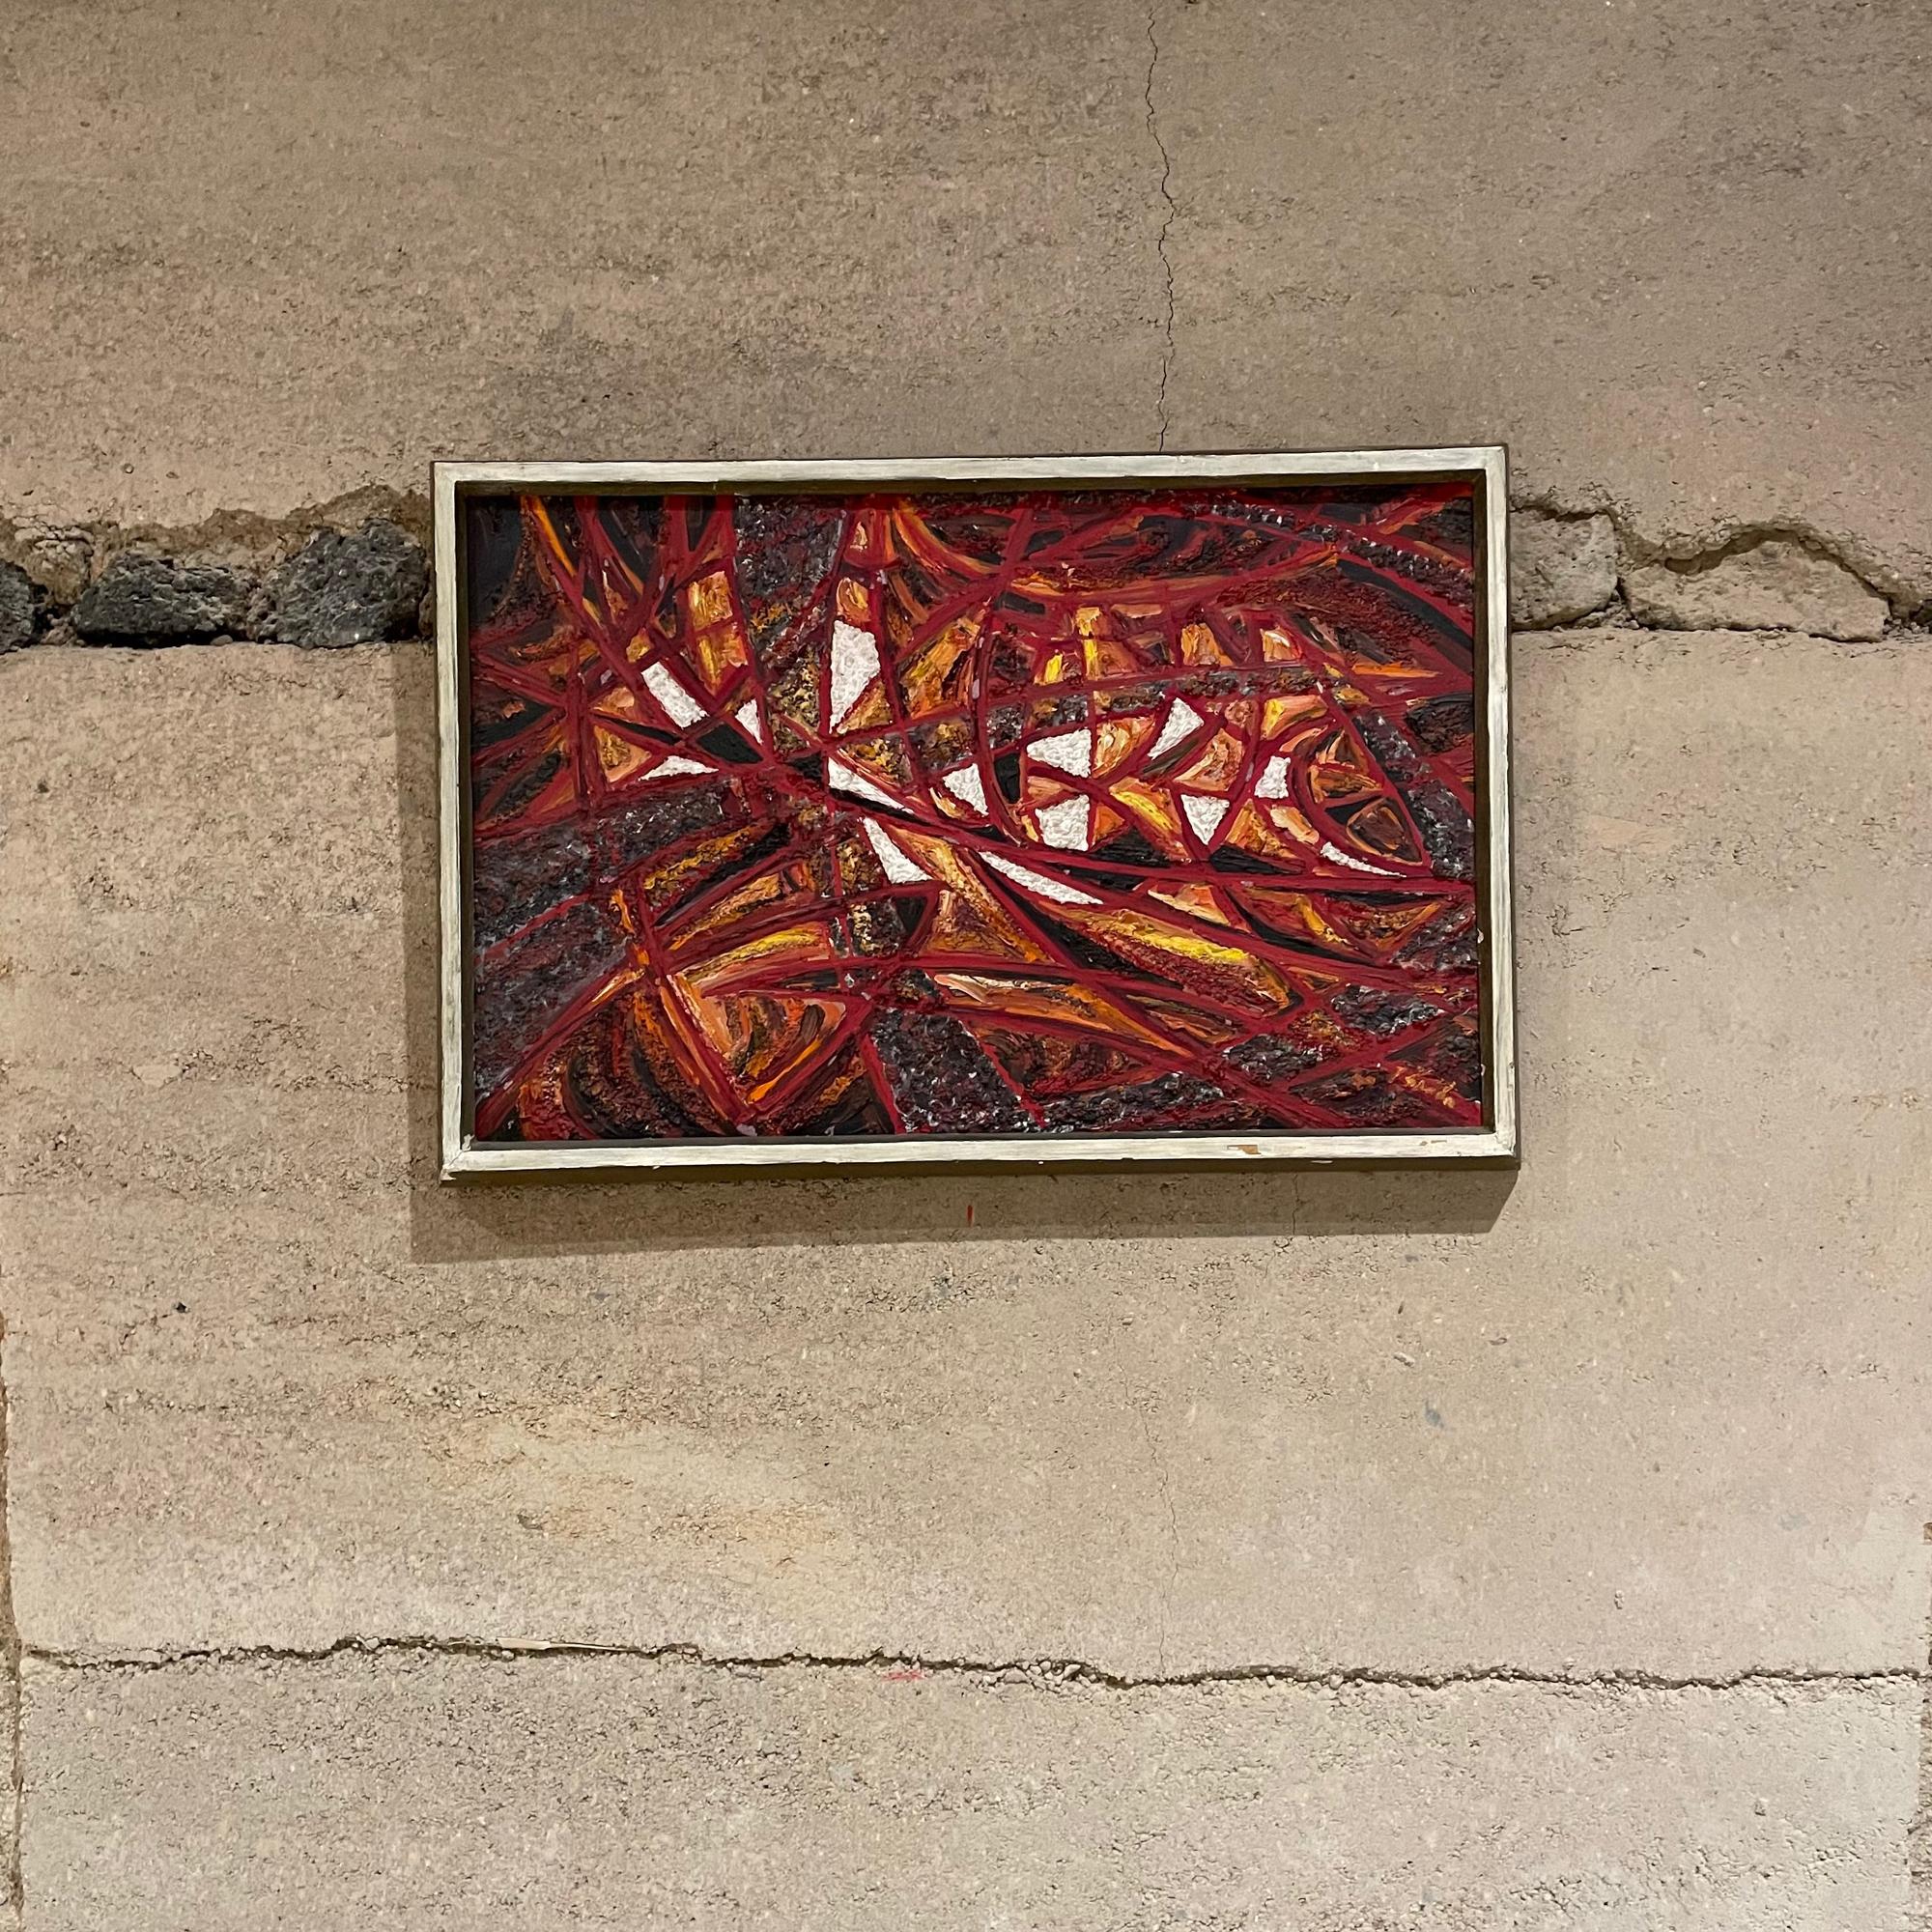 Modern Abstract European oil on canvas Painting 1966
In the style of Pedro Coronel art.
Spectacular Fire Red oil framed.
Signed and dated on back, unclear.
Dimensions: 19w x 13h x 1.25d inches
Original unaltered vintage unrestored condition.